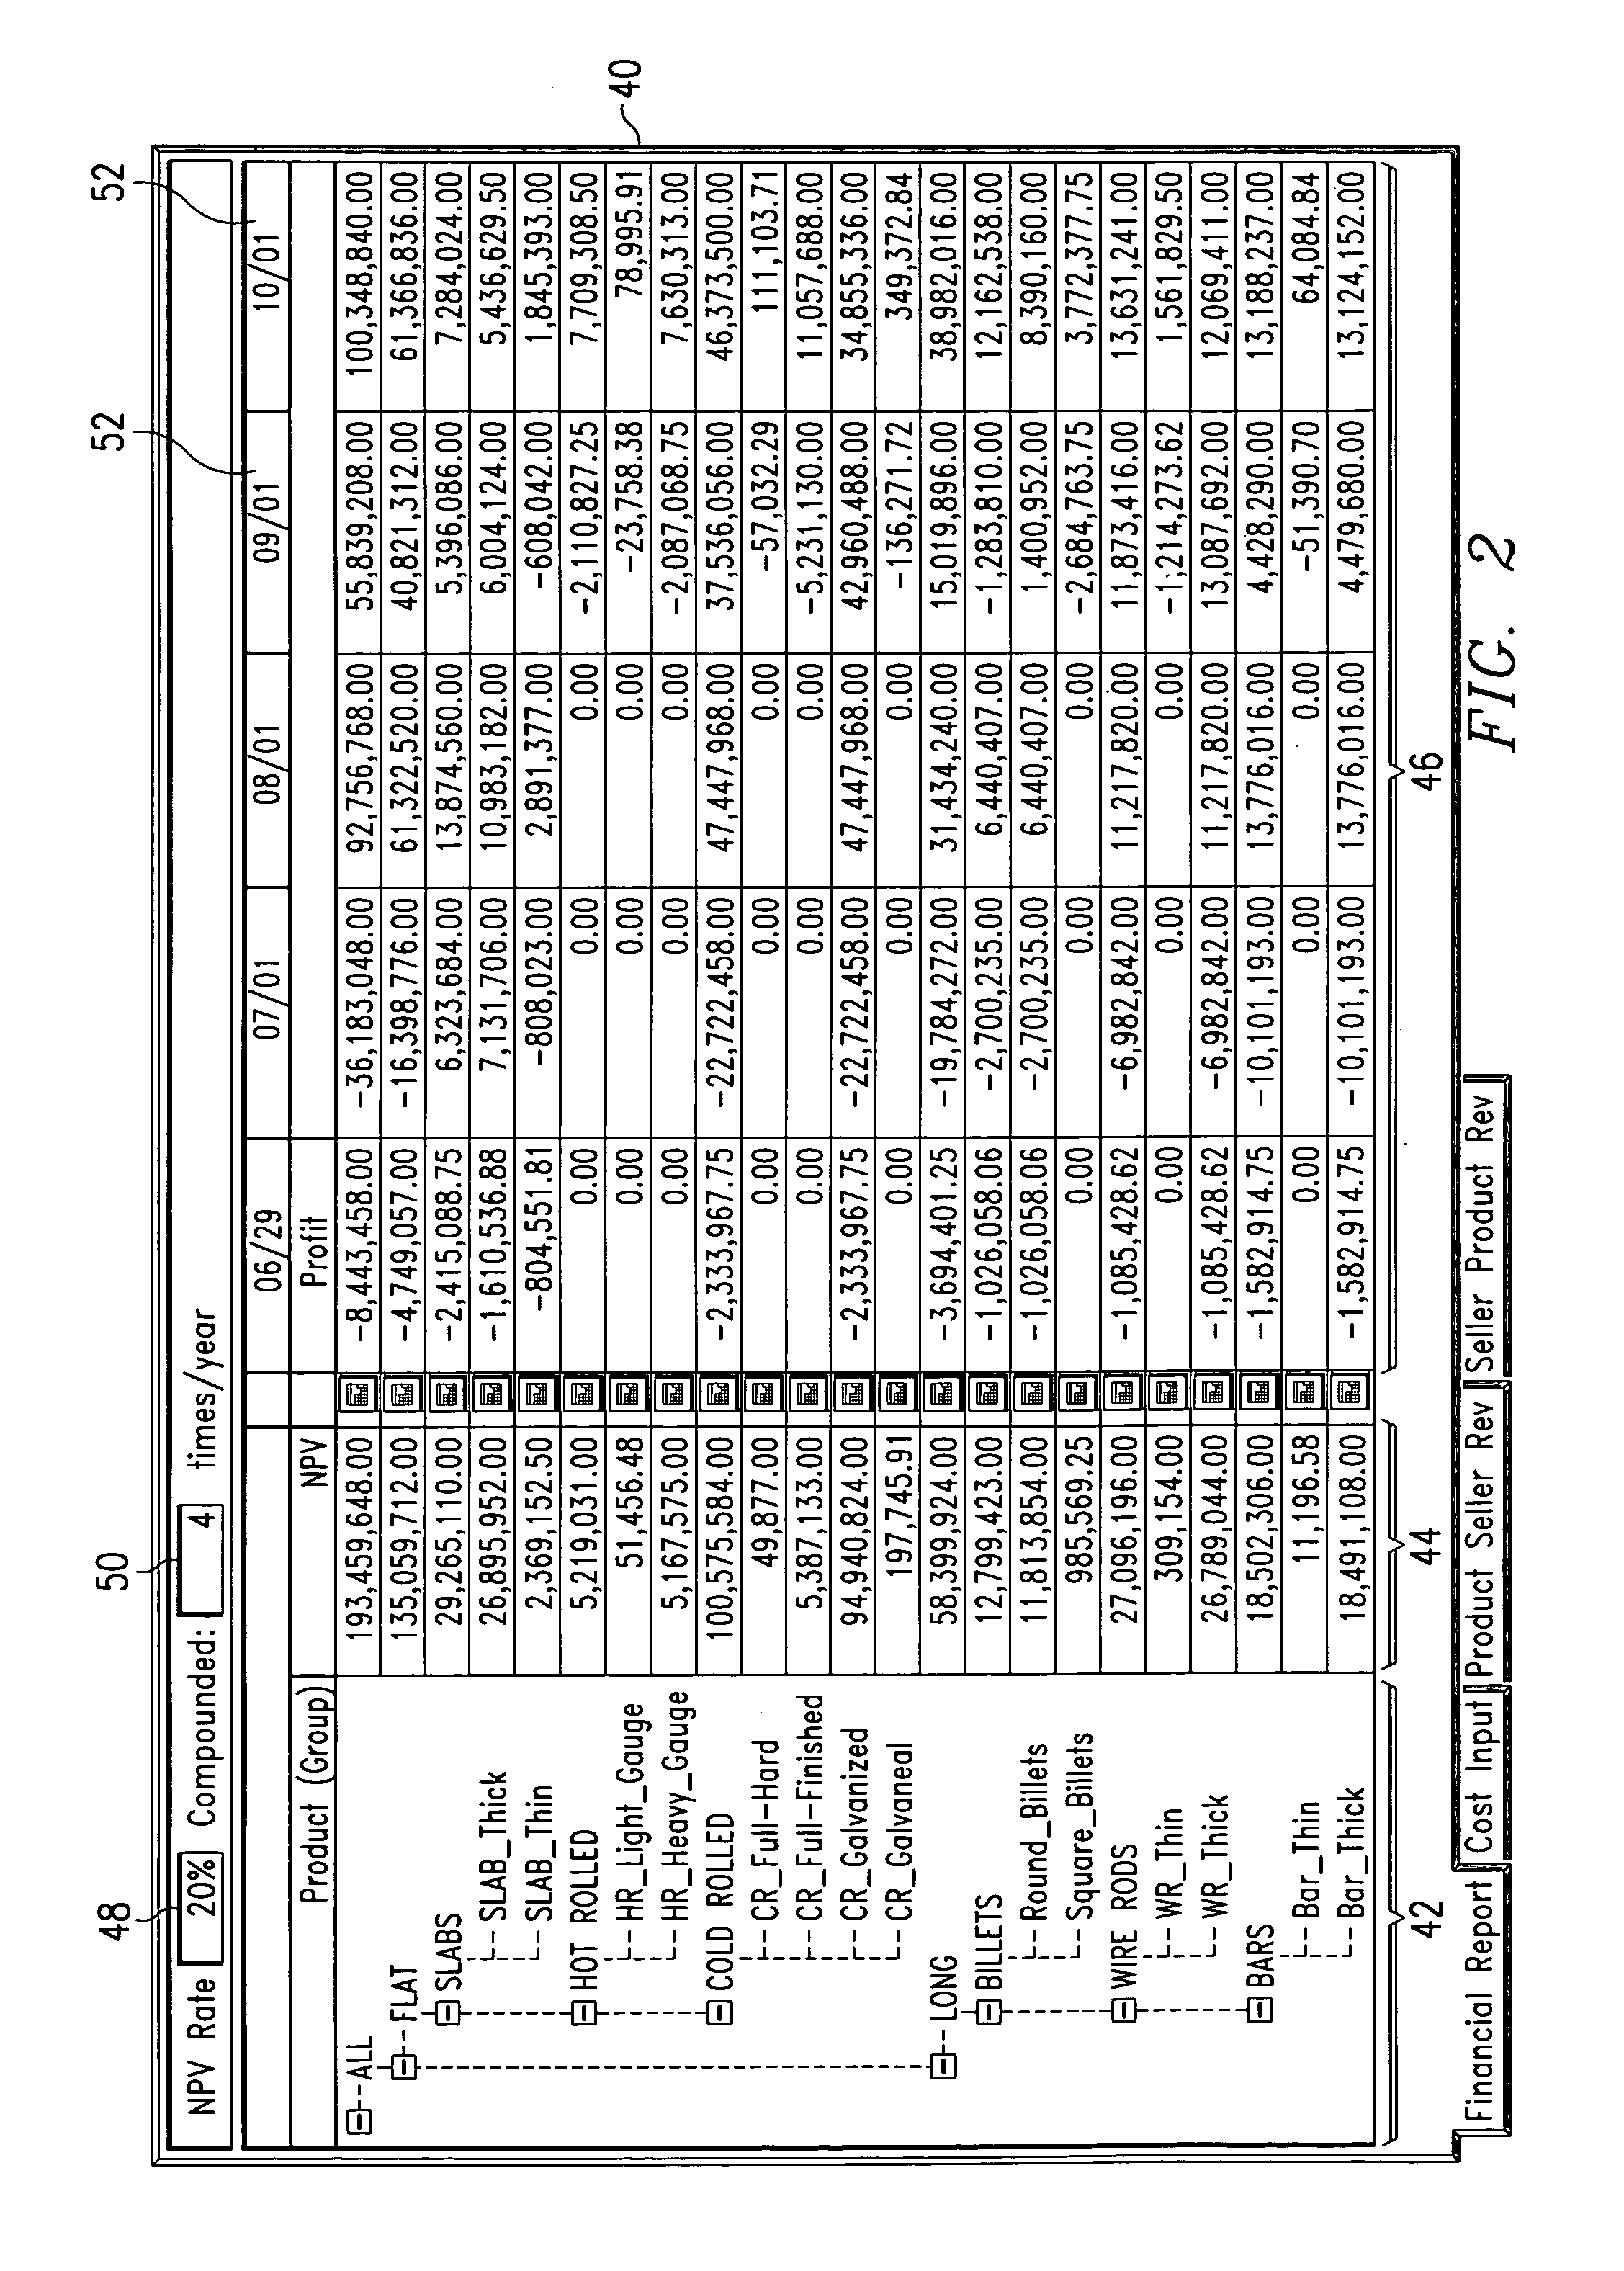 System and method for displaying planning information associated with a supply chain